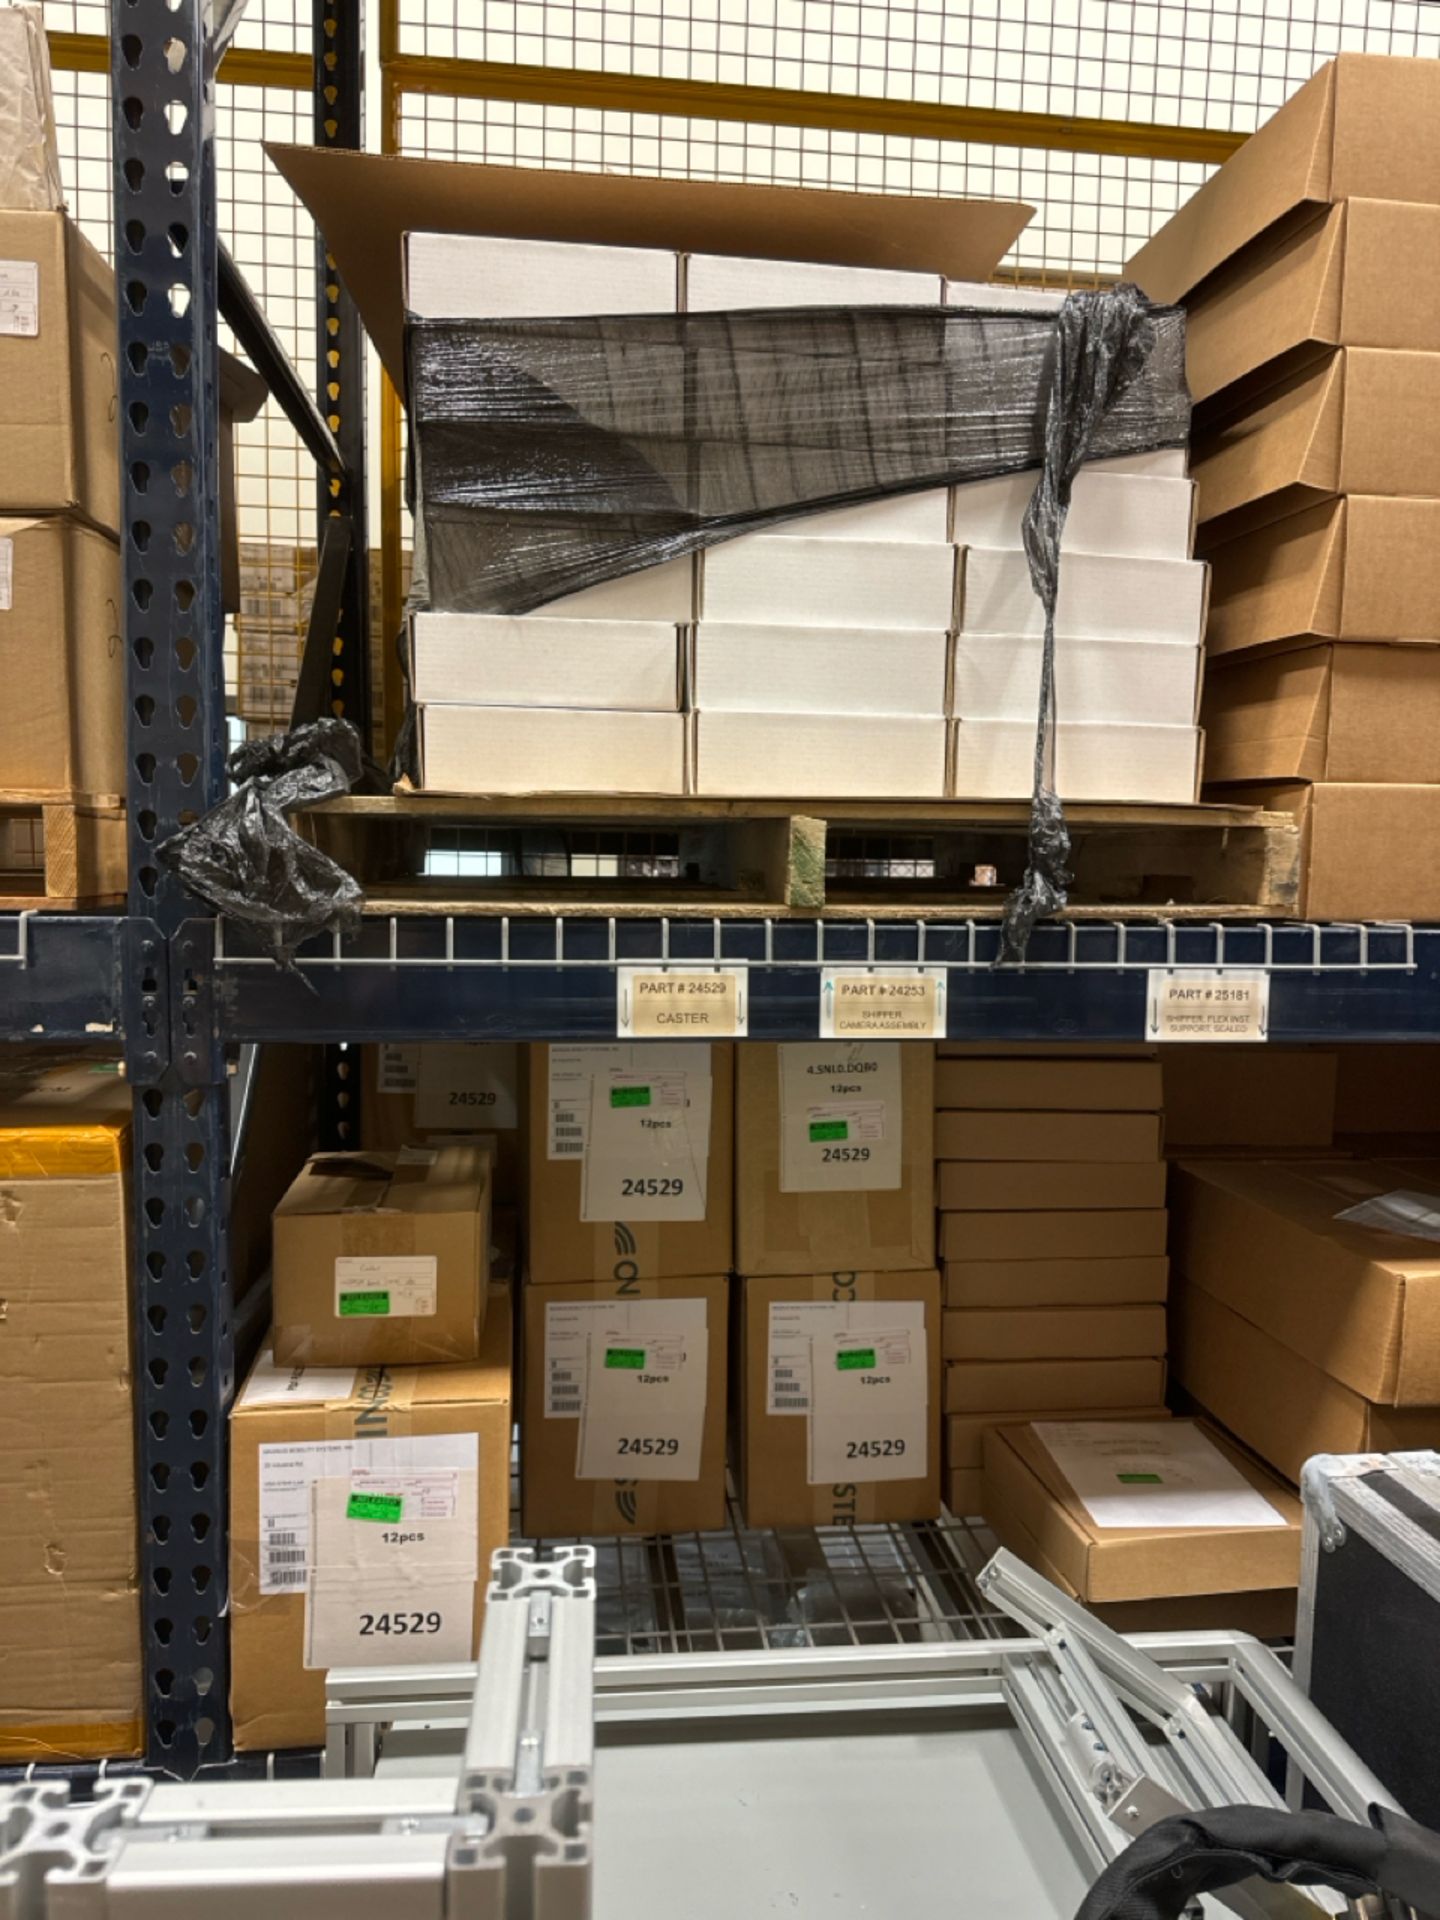 Contents of Center Pallet Racking - Image 66 of 68